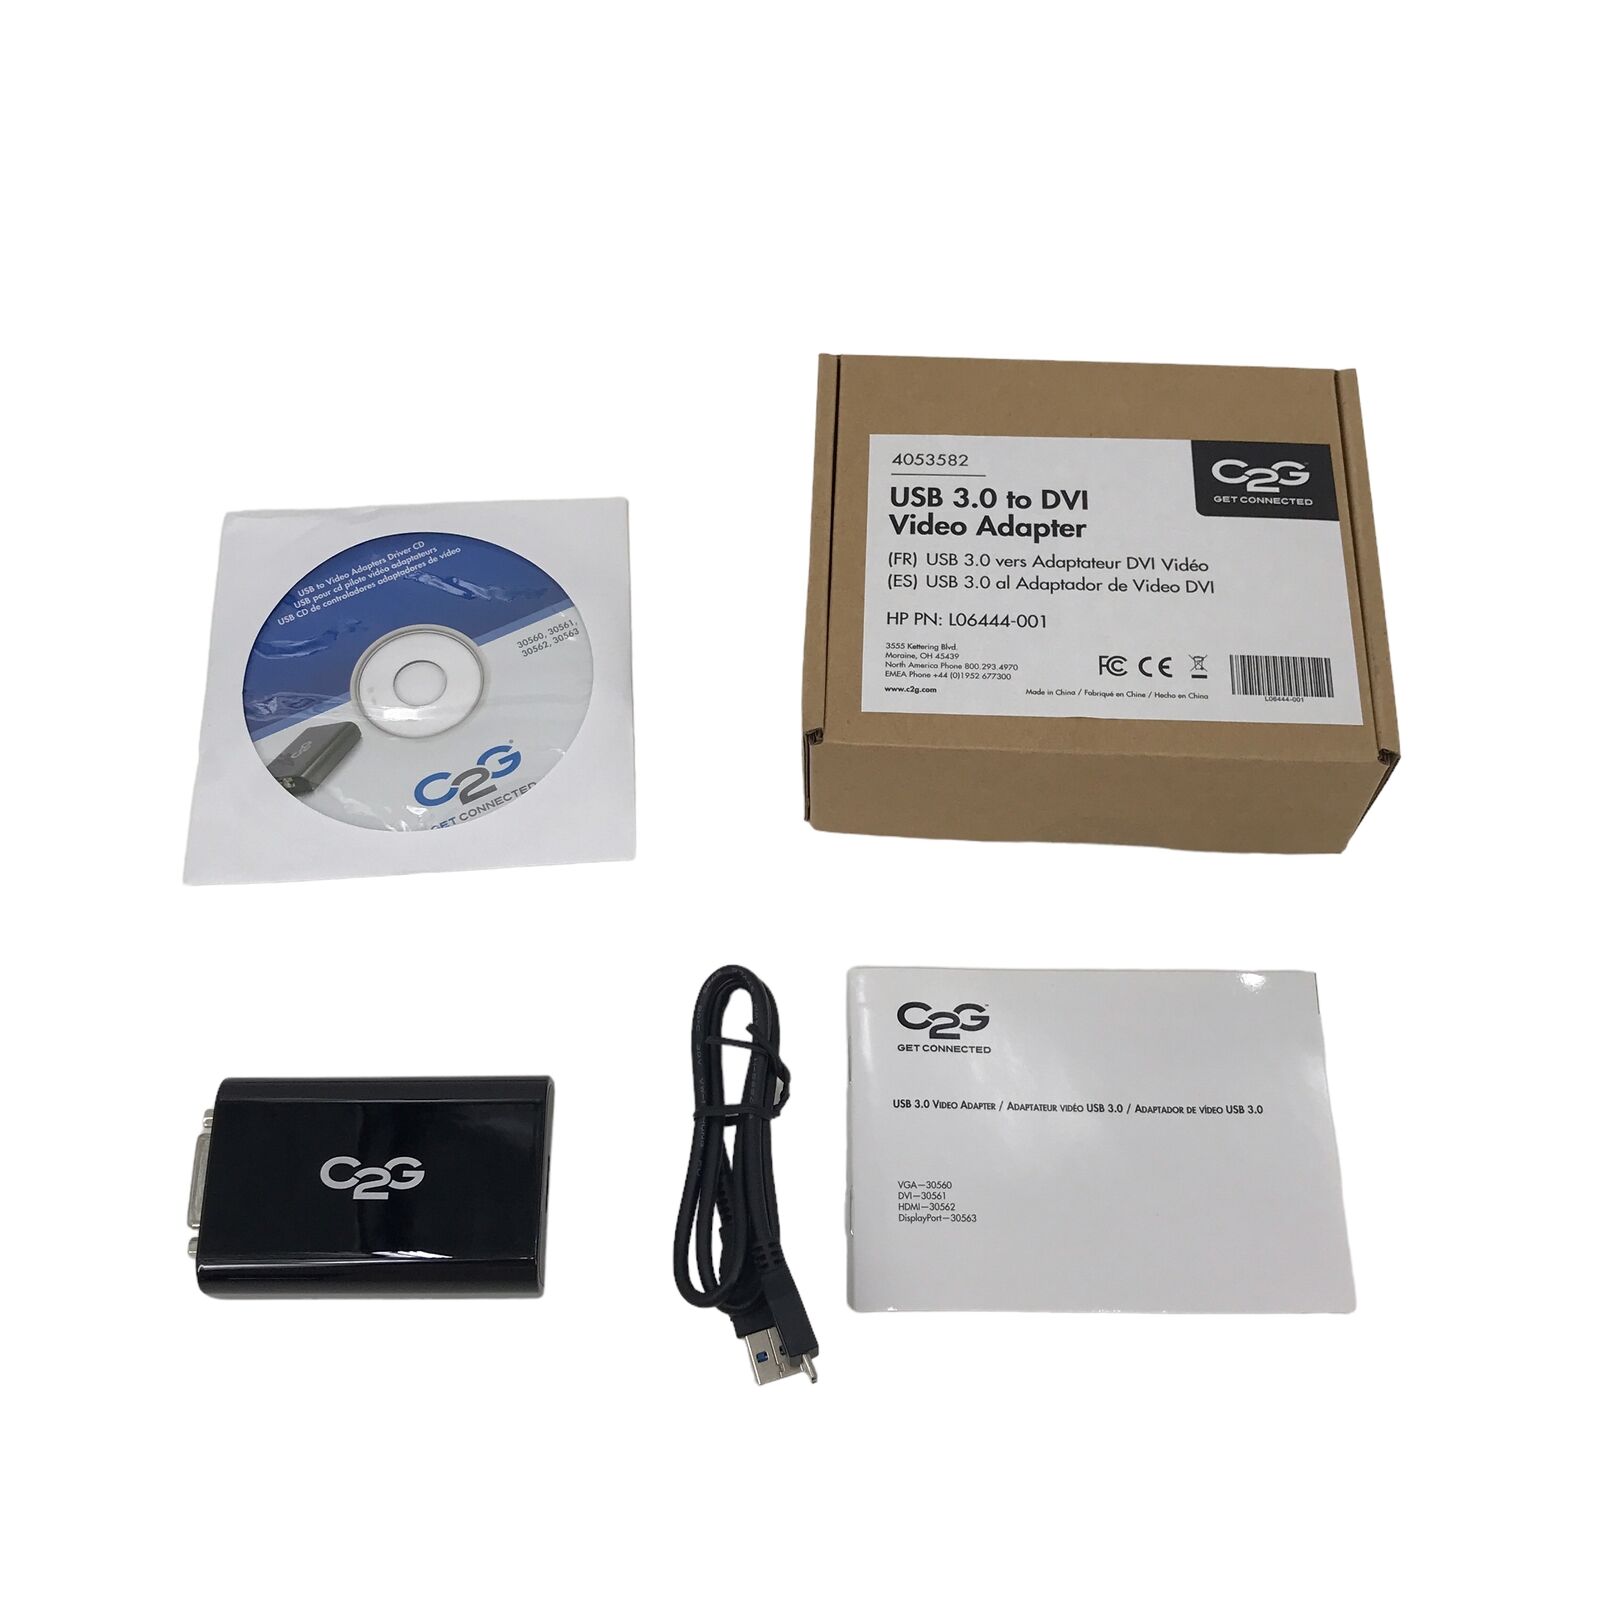 C2G Cables To Go 4053582 USB 3.0 To DVI Video Adapter Model 30561 ( Black )